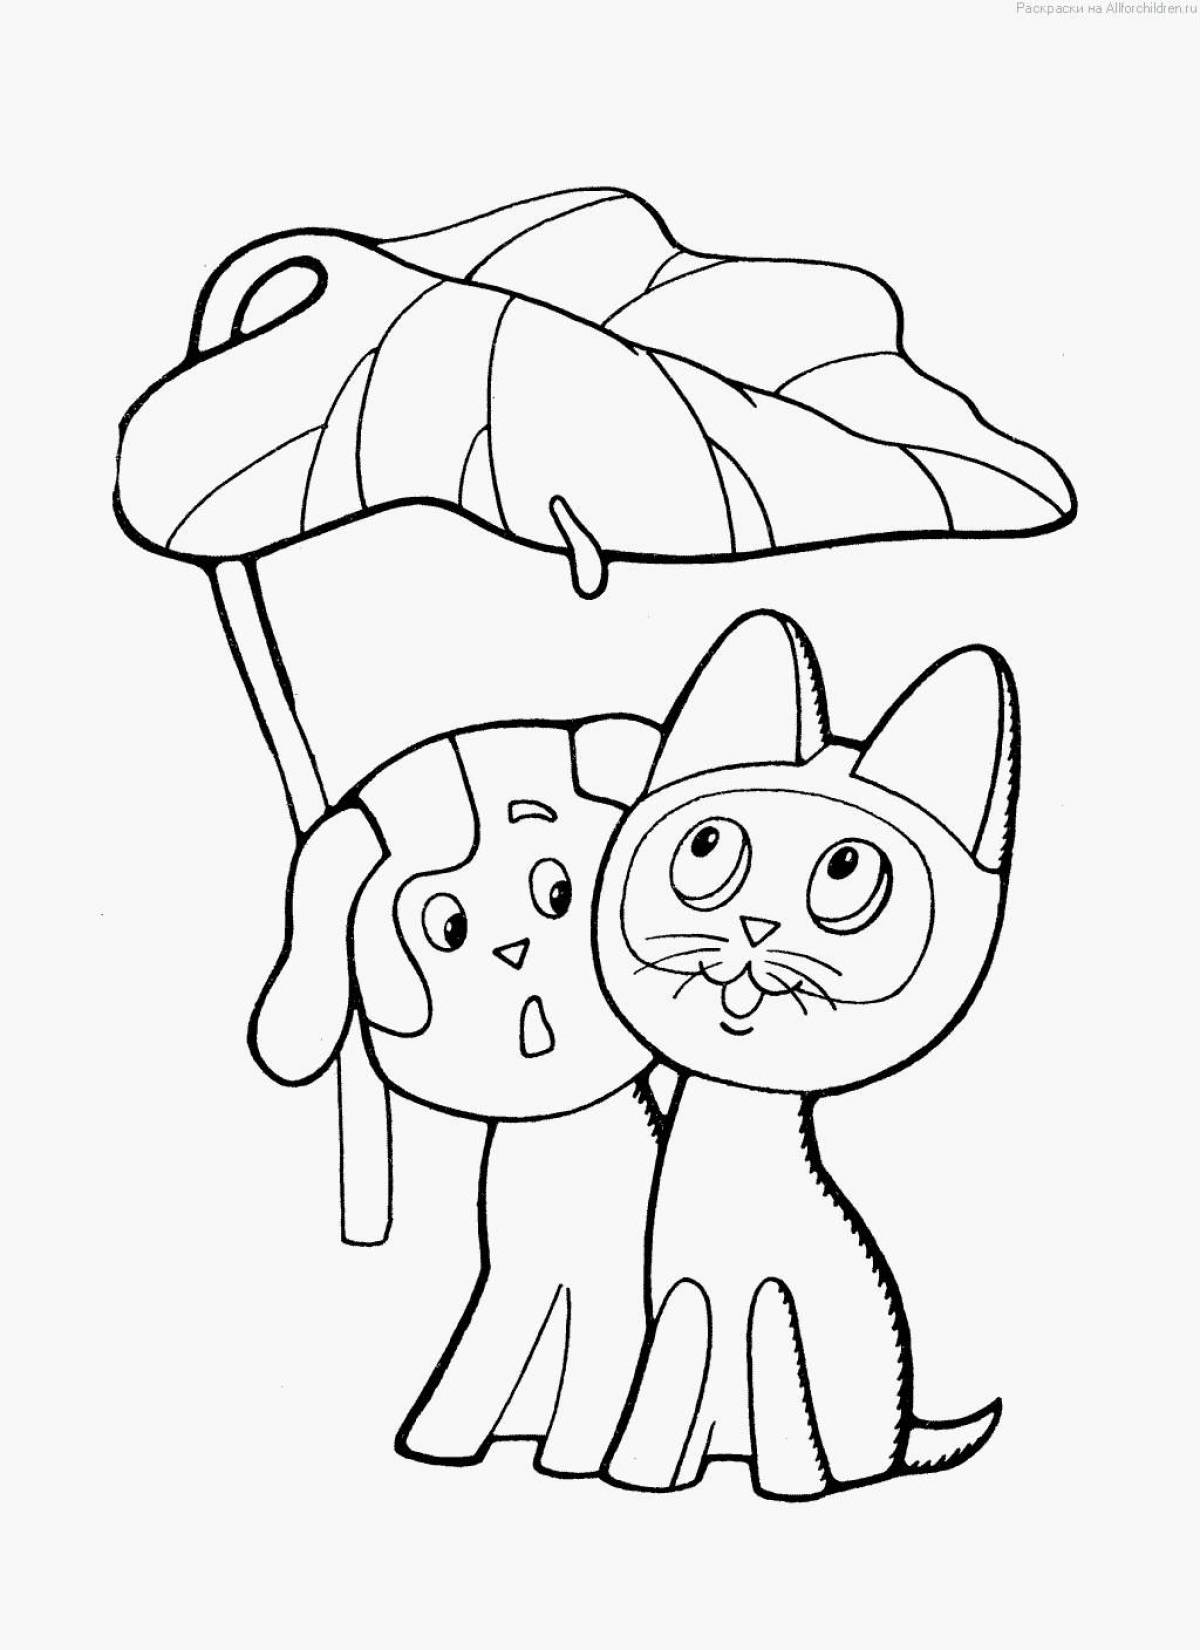 Coloring book witty kitten